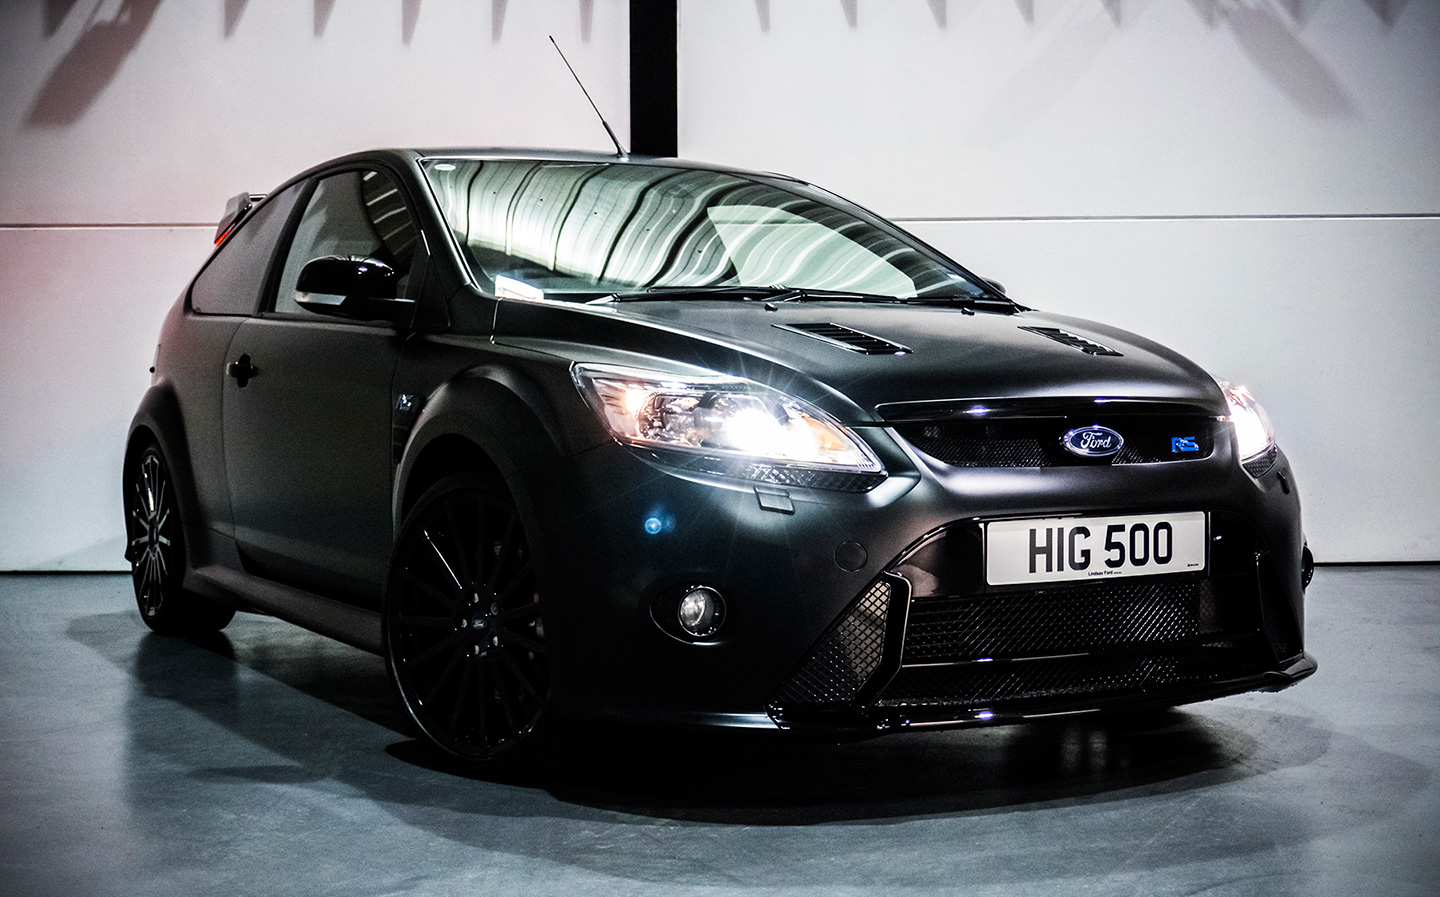 2010 Ford Focus RS500 for sale for nearly £70,000